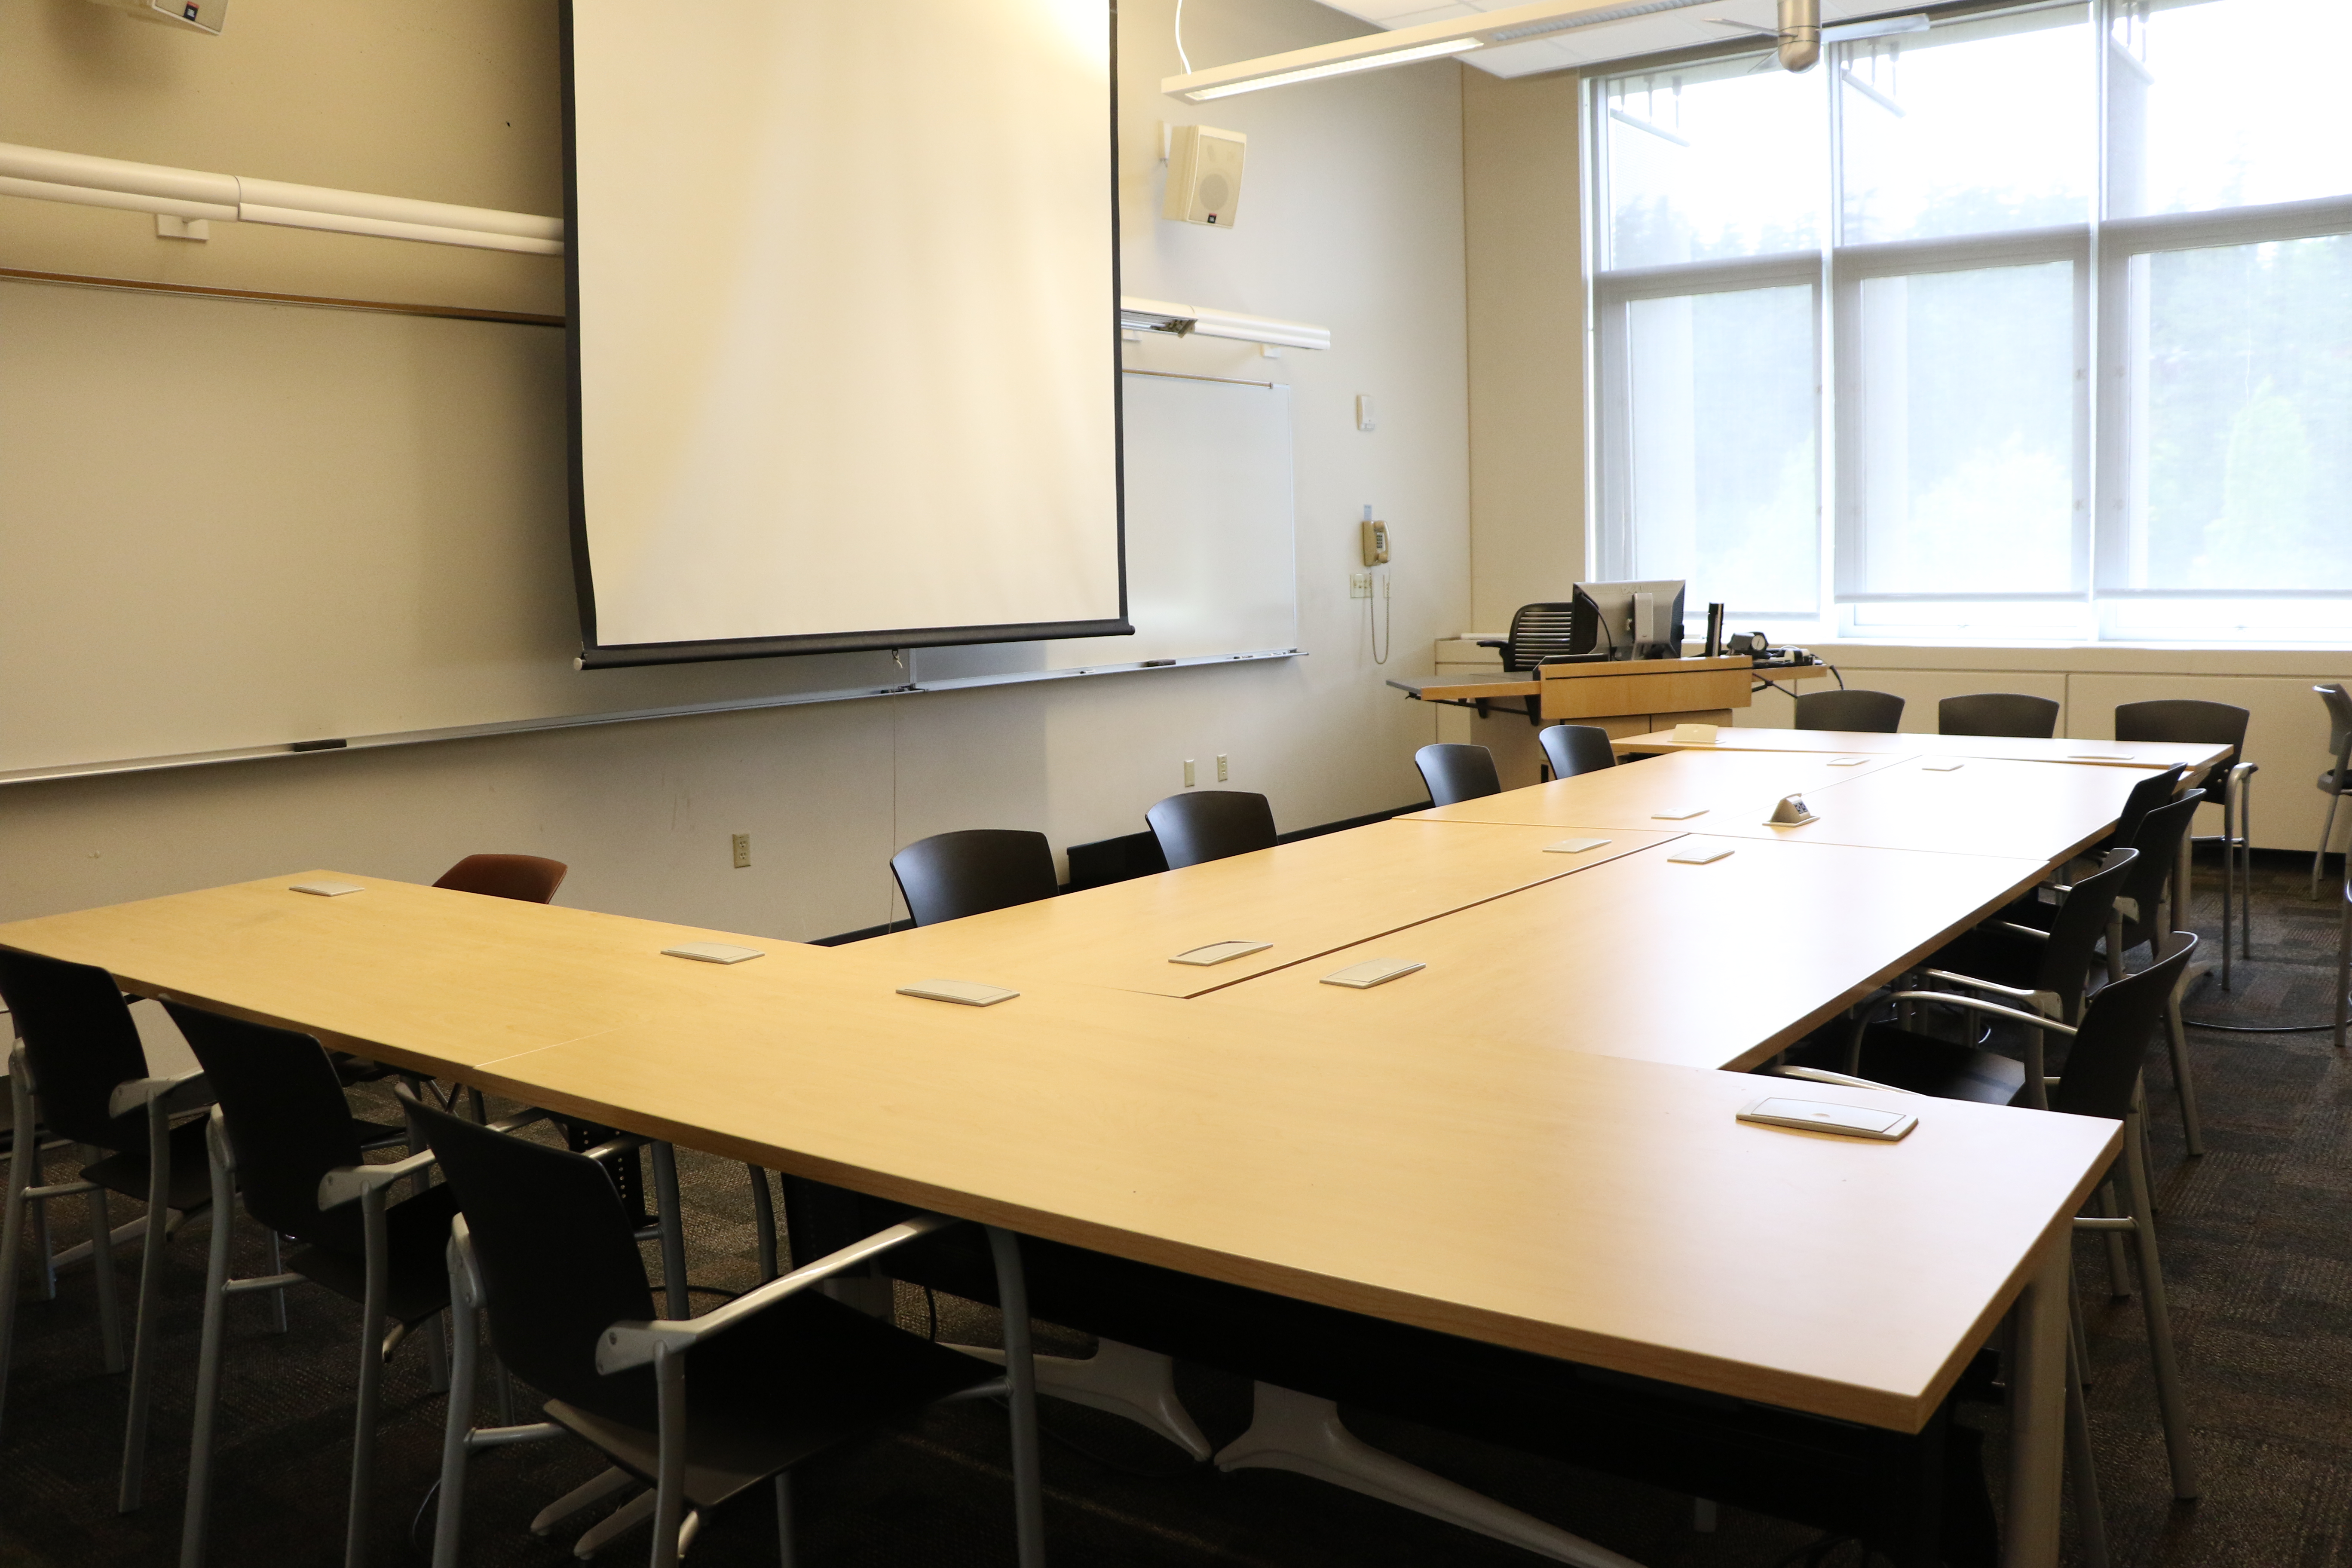 Room consists of carpet, moveable tables and chairs and a podium and whiteboard located at the front of the room. 